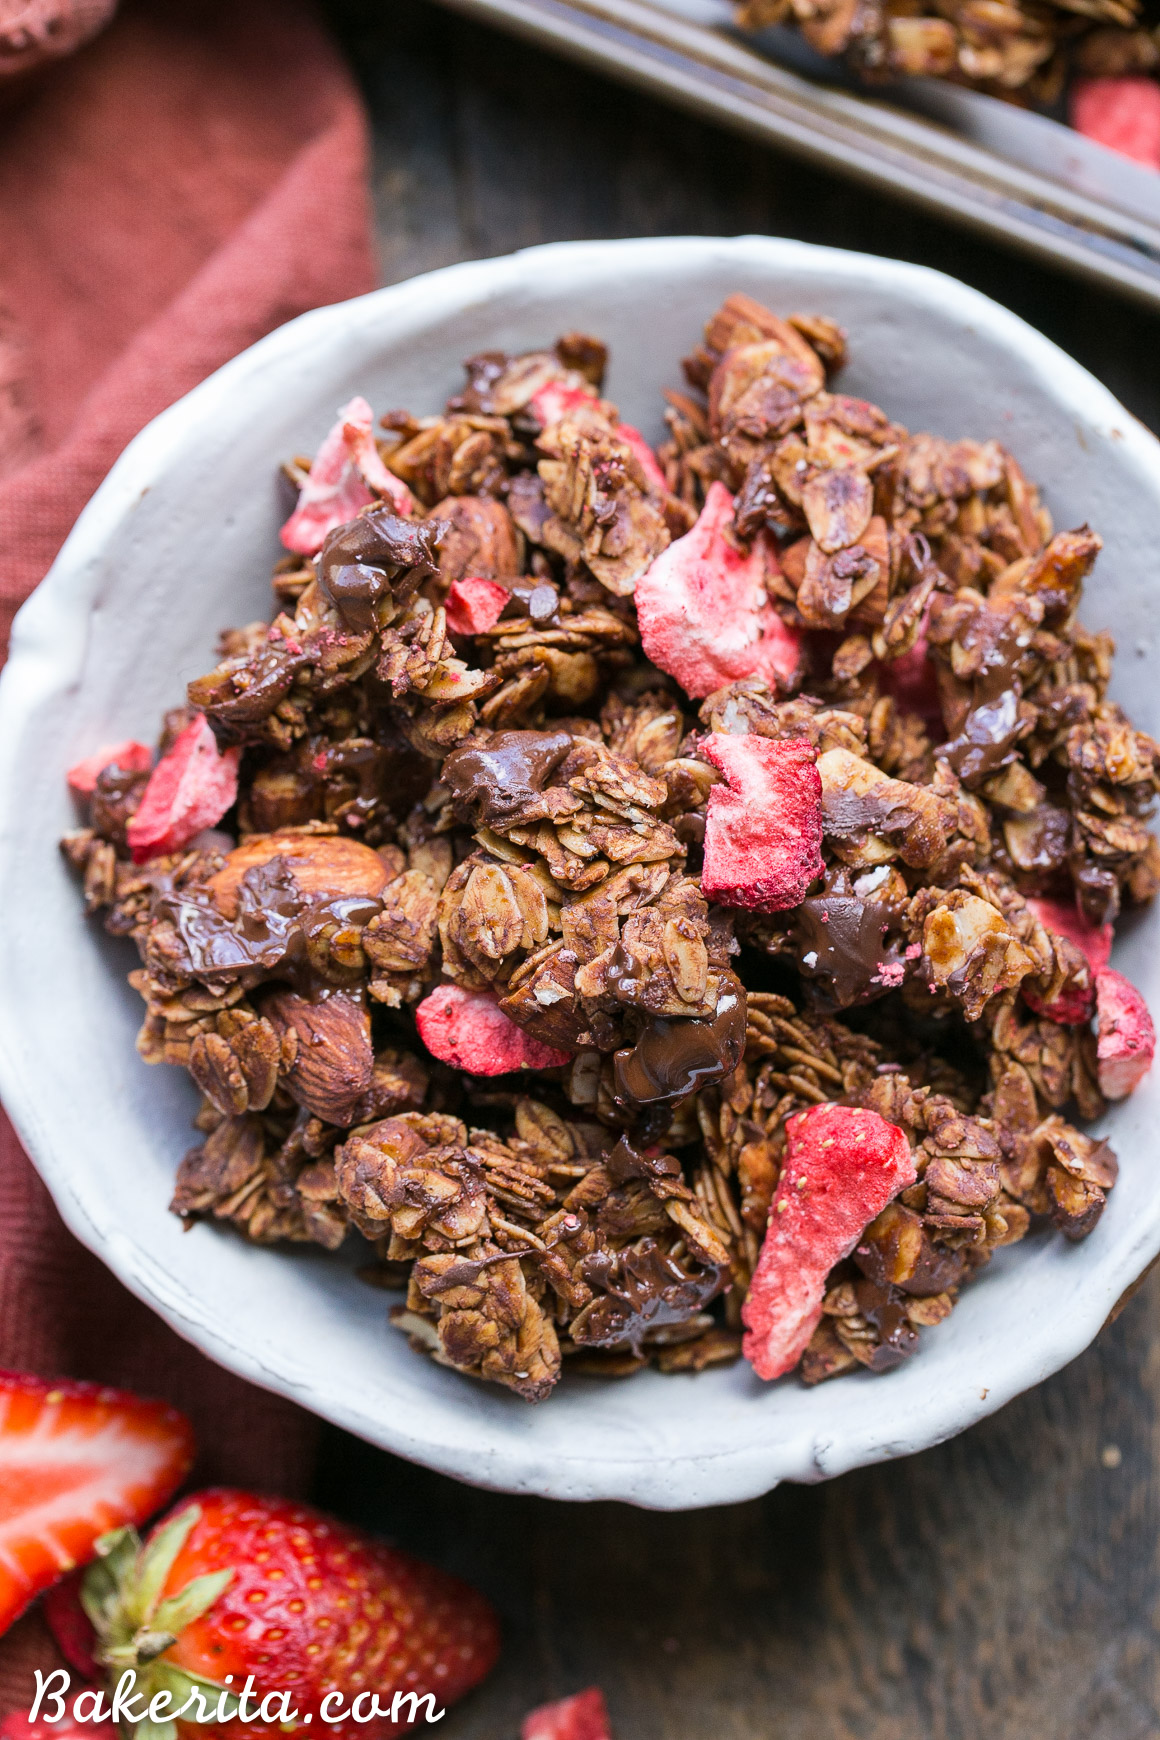 Chocolate Strawberry Granola is healthy enough to eat for breakfast, but it's so delicious you'll want to have it for dessert too! This simple and easy granola recipe is gluten-free, vegan, and refined sugar free, and it's loaded with chocolate & strawberry flavor.